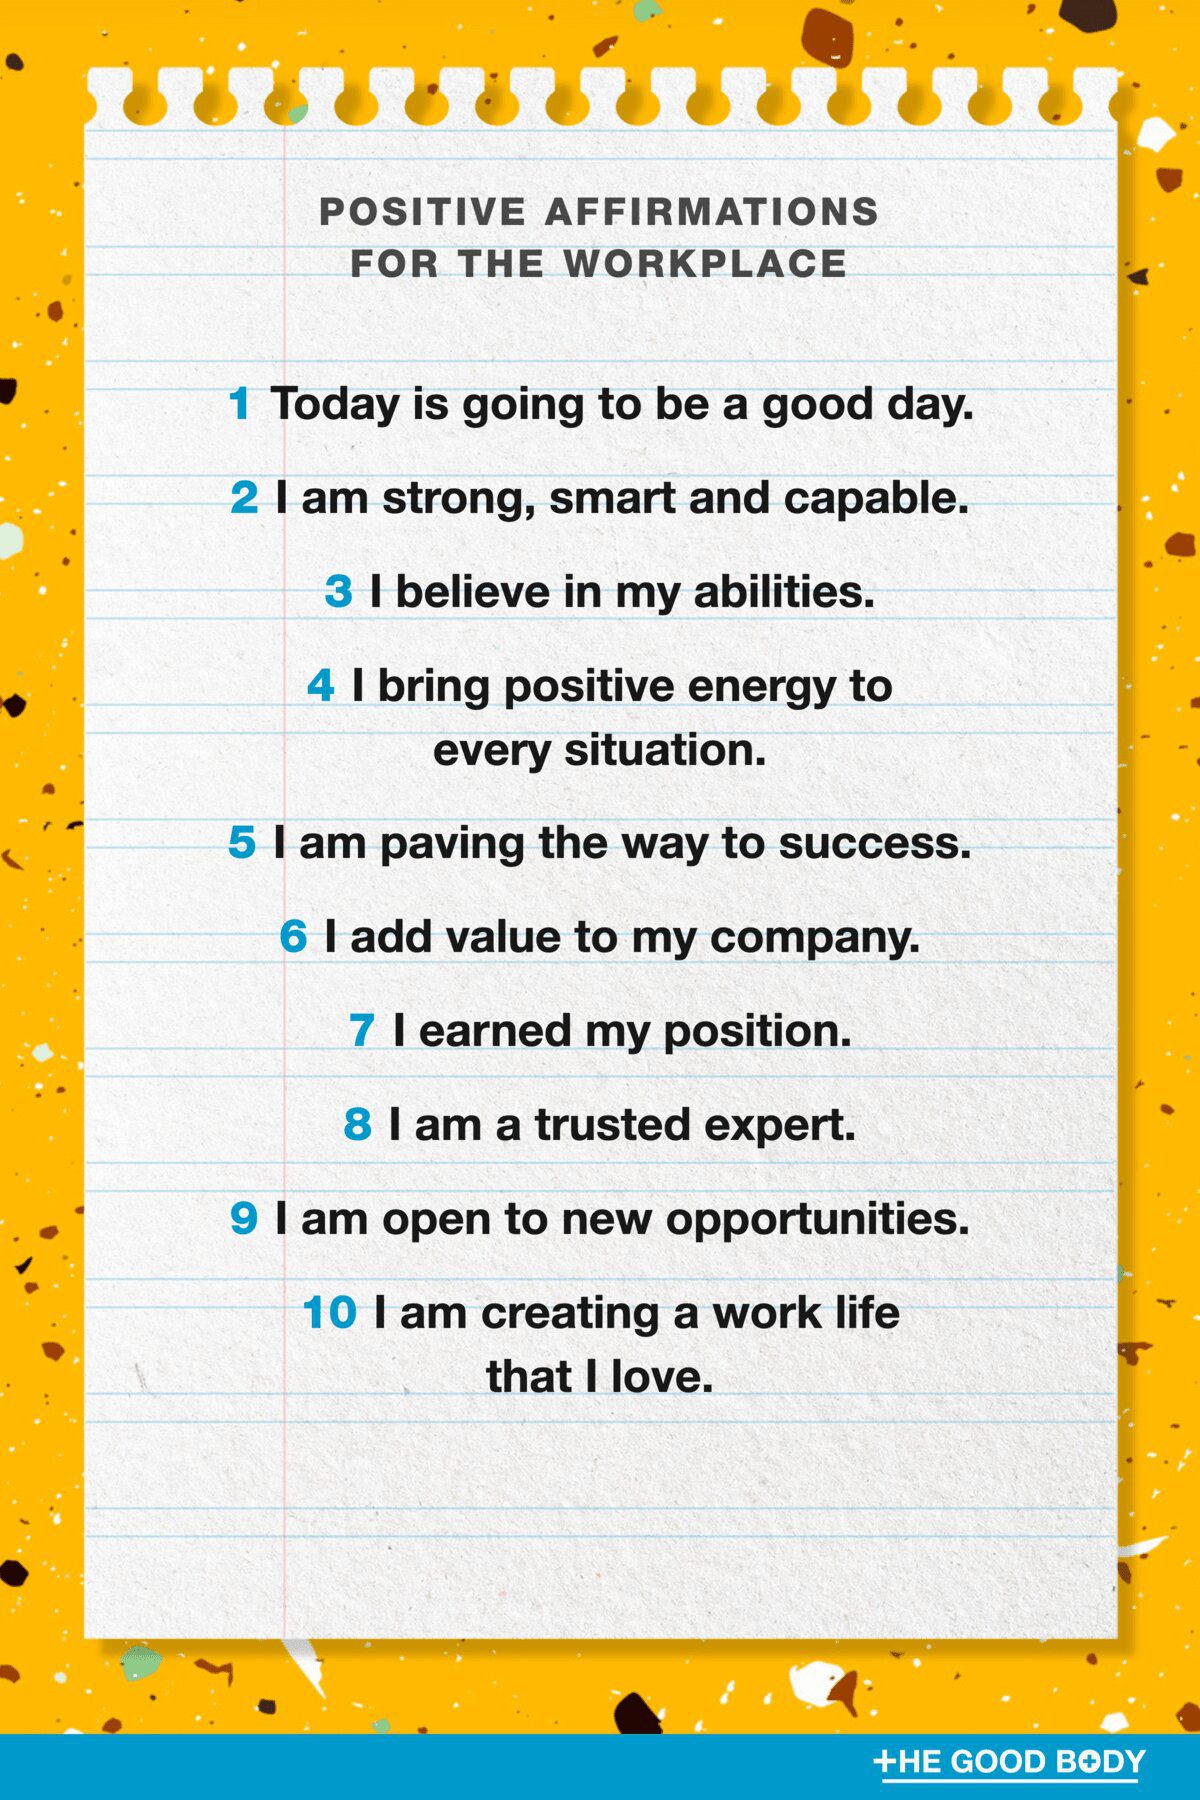 10 Positive Affirmations for the Workplace on Double-Lined Paper